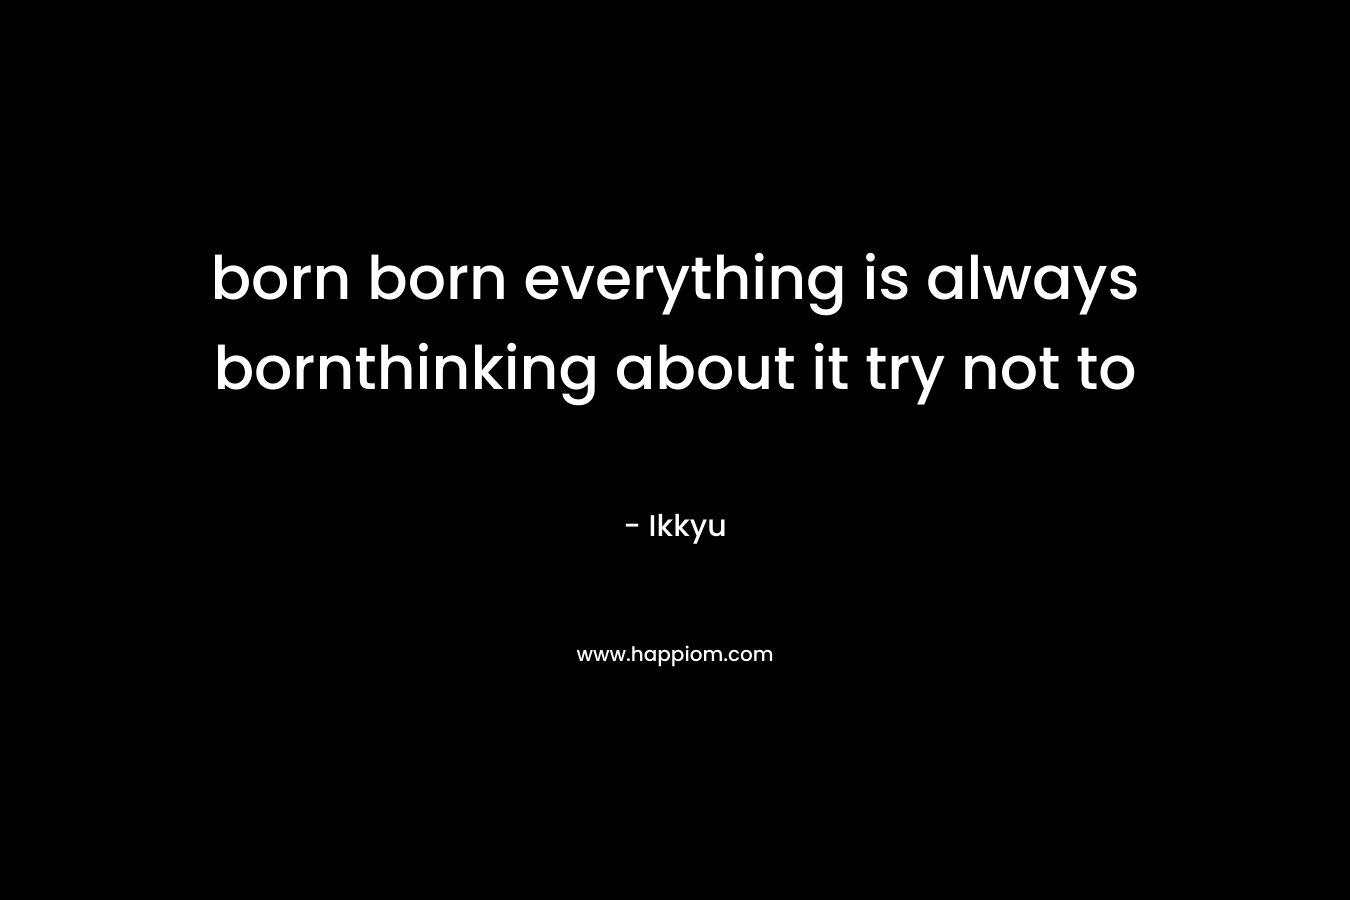 born born everything is always bornthinking about it try not to